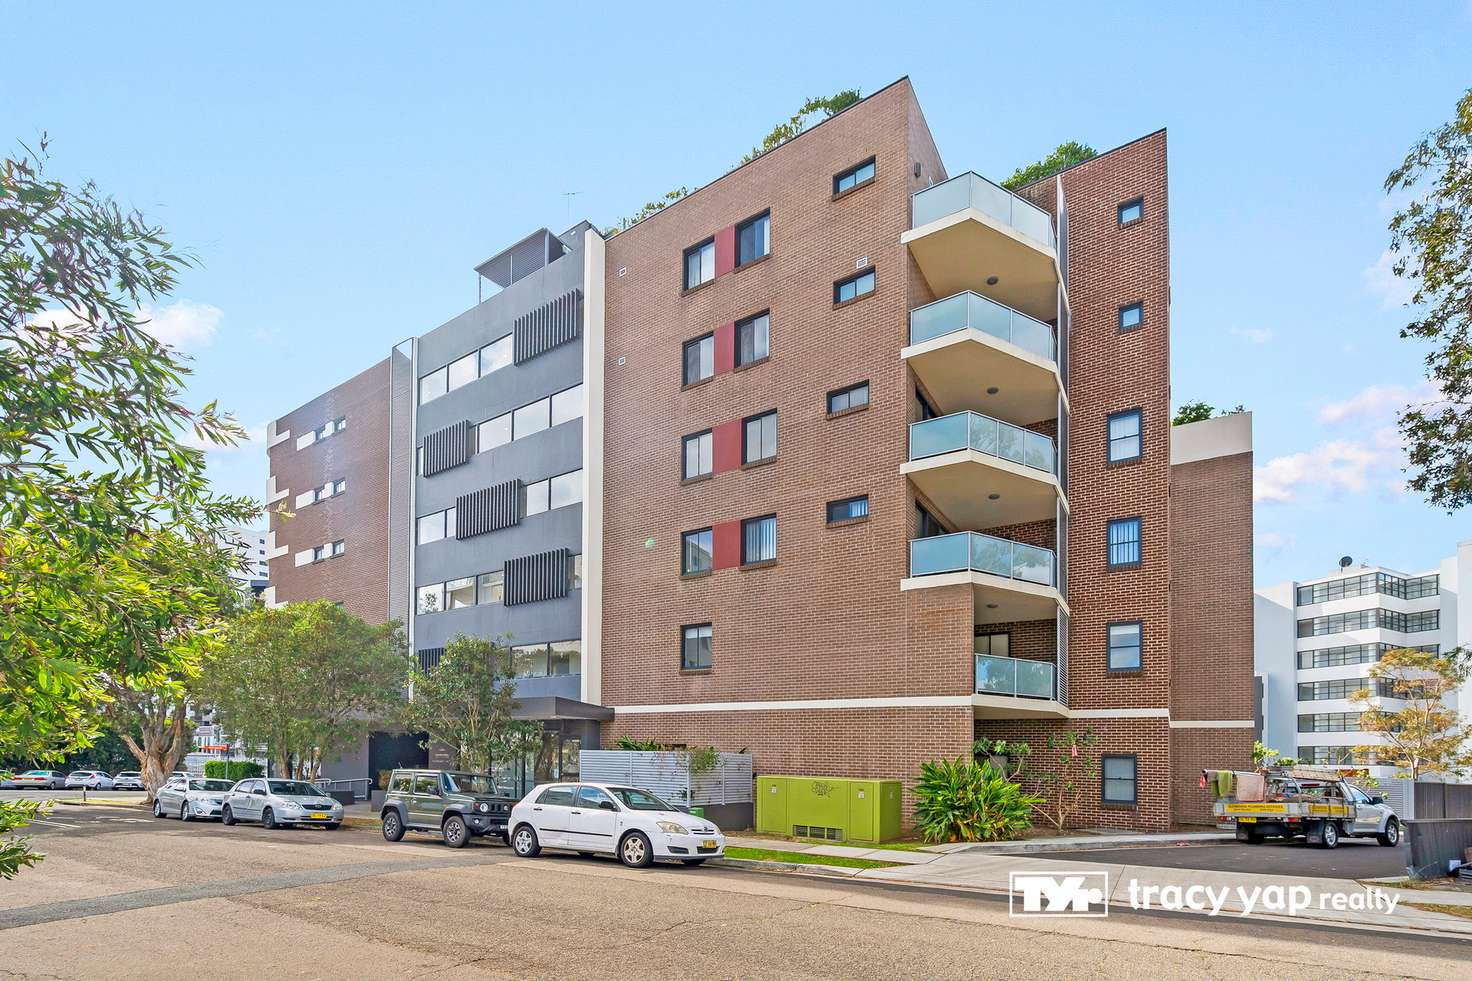 Main view of Homely apartment listing, 94-96 Railway Terrace, Merrylands NSW 2160